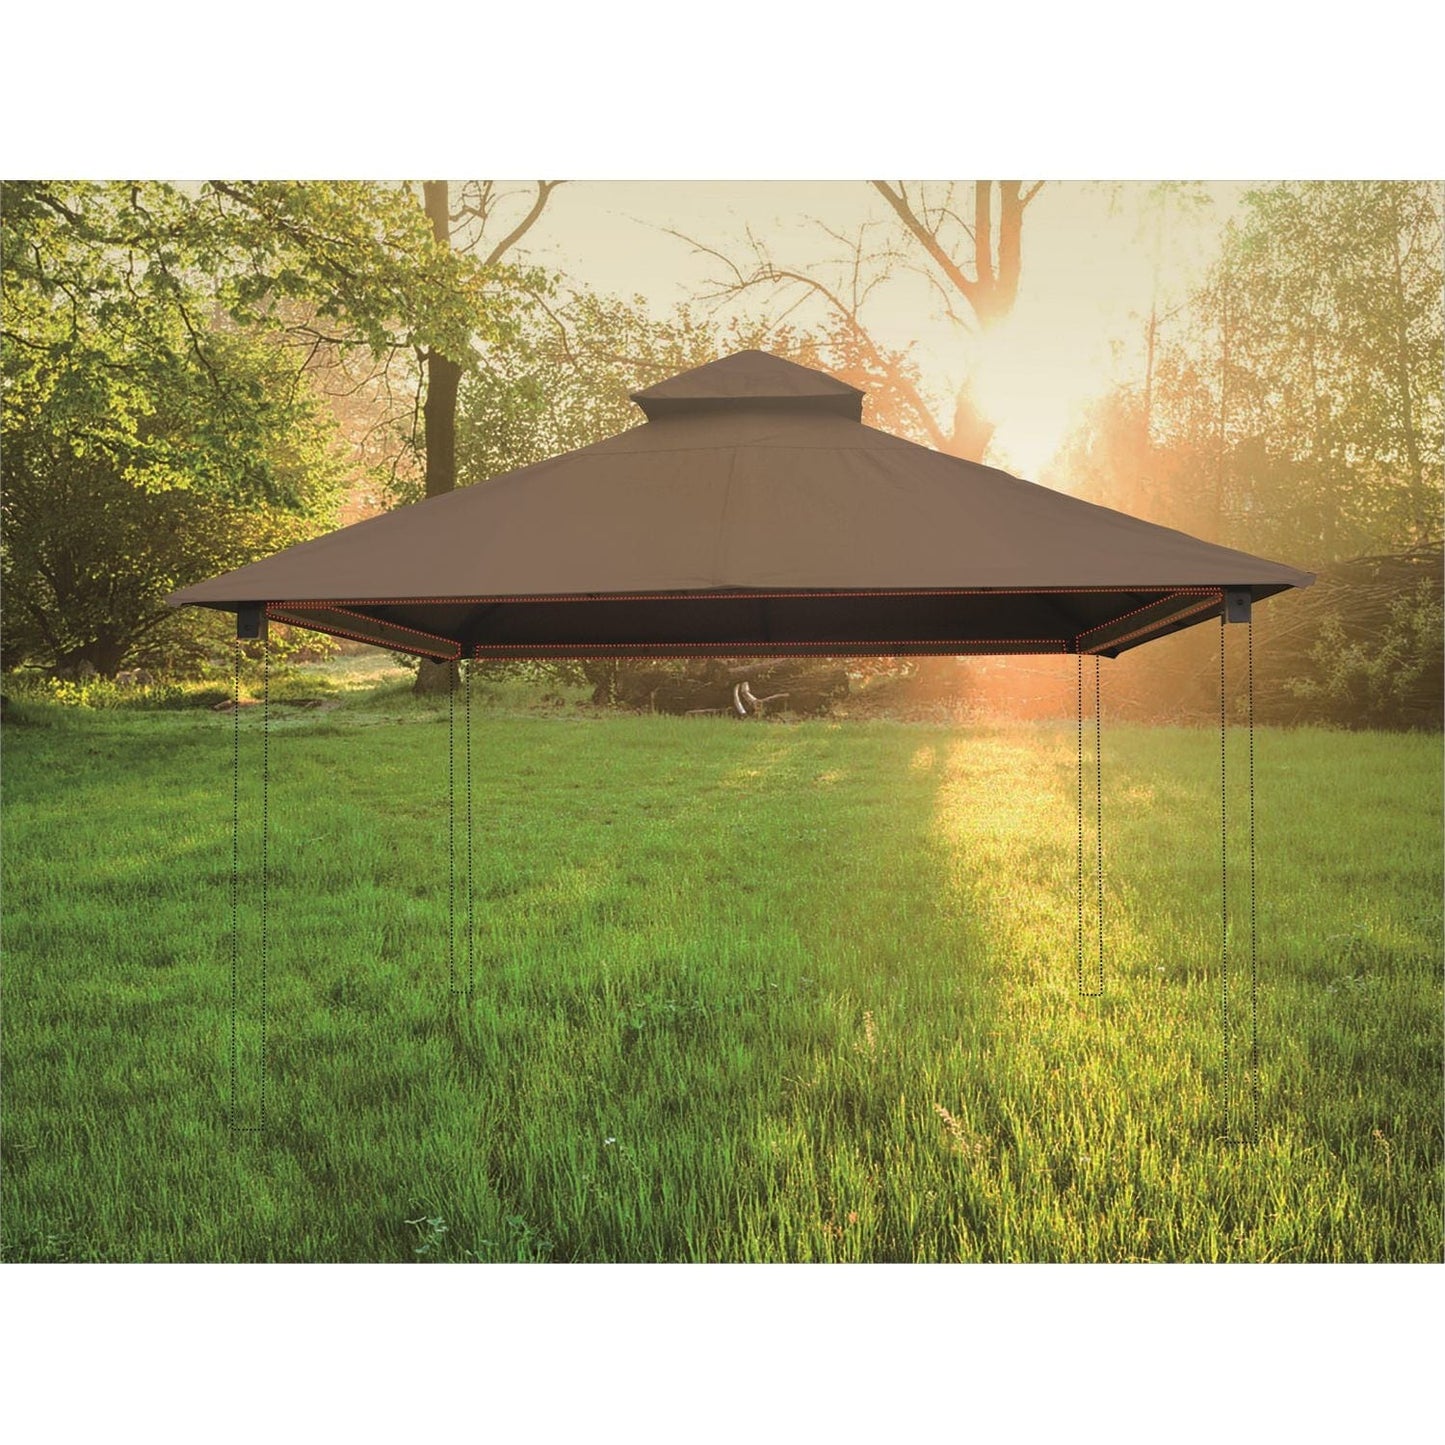 Riverstone Industries Soft Top Gazebos Riverstone | ACACIA Gazebo Roof Framing and Mounting Kit With OutDURA Canopy - Linen